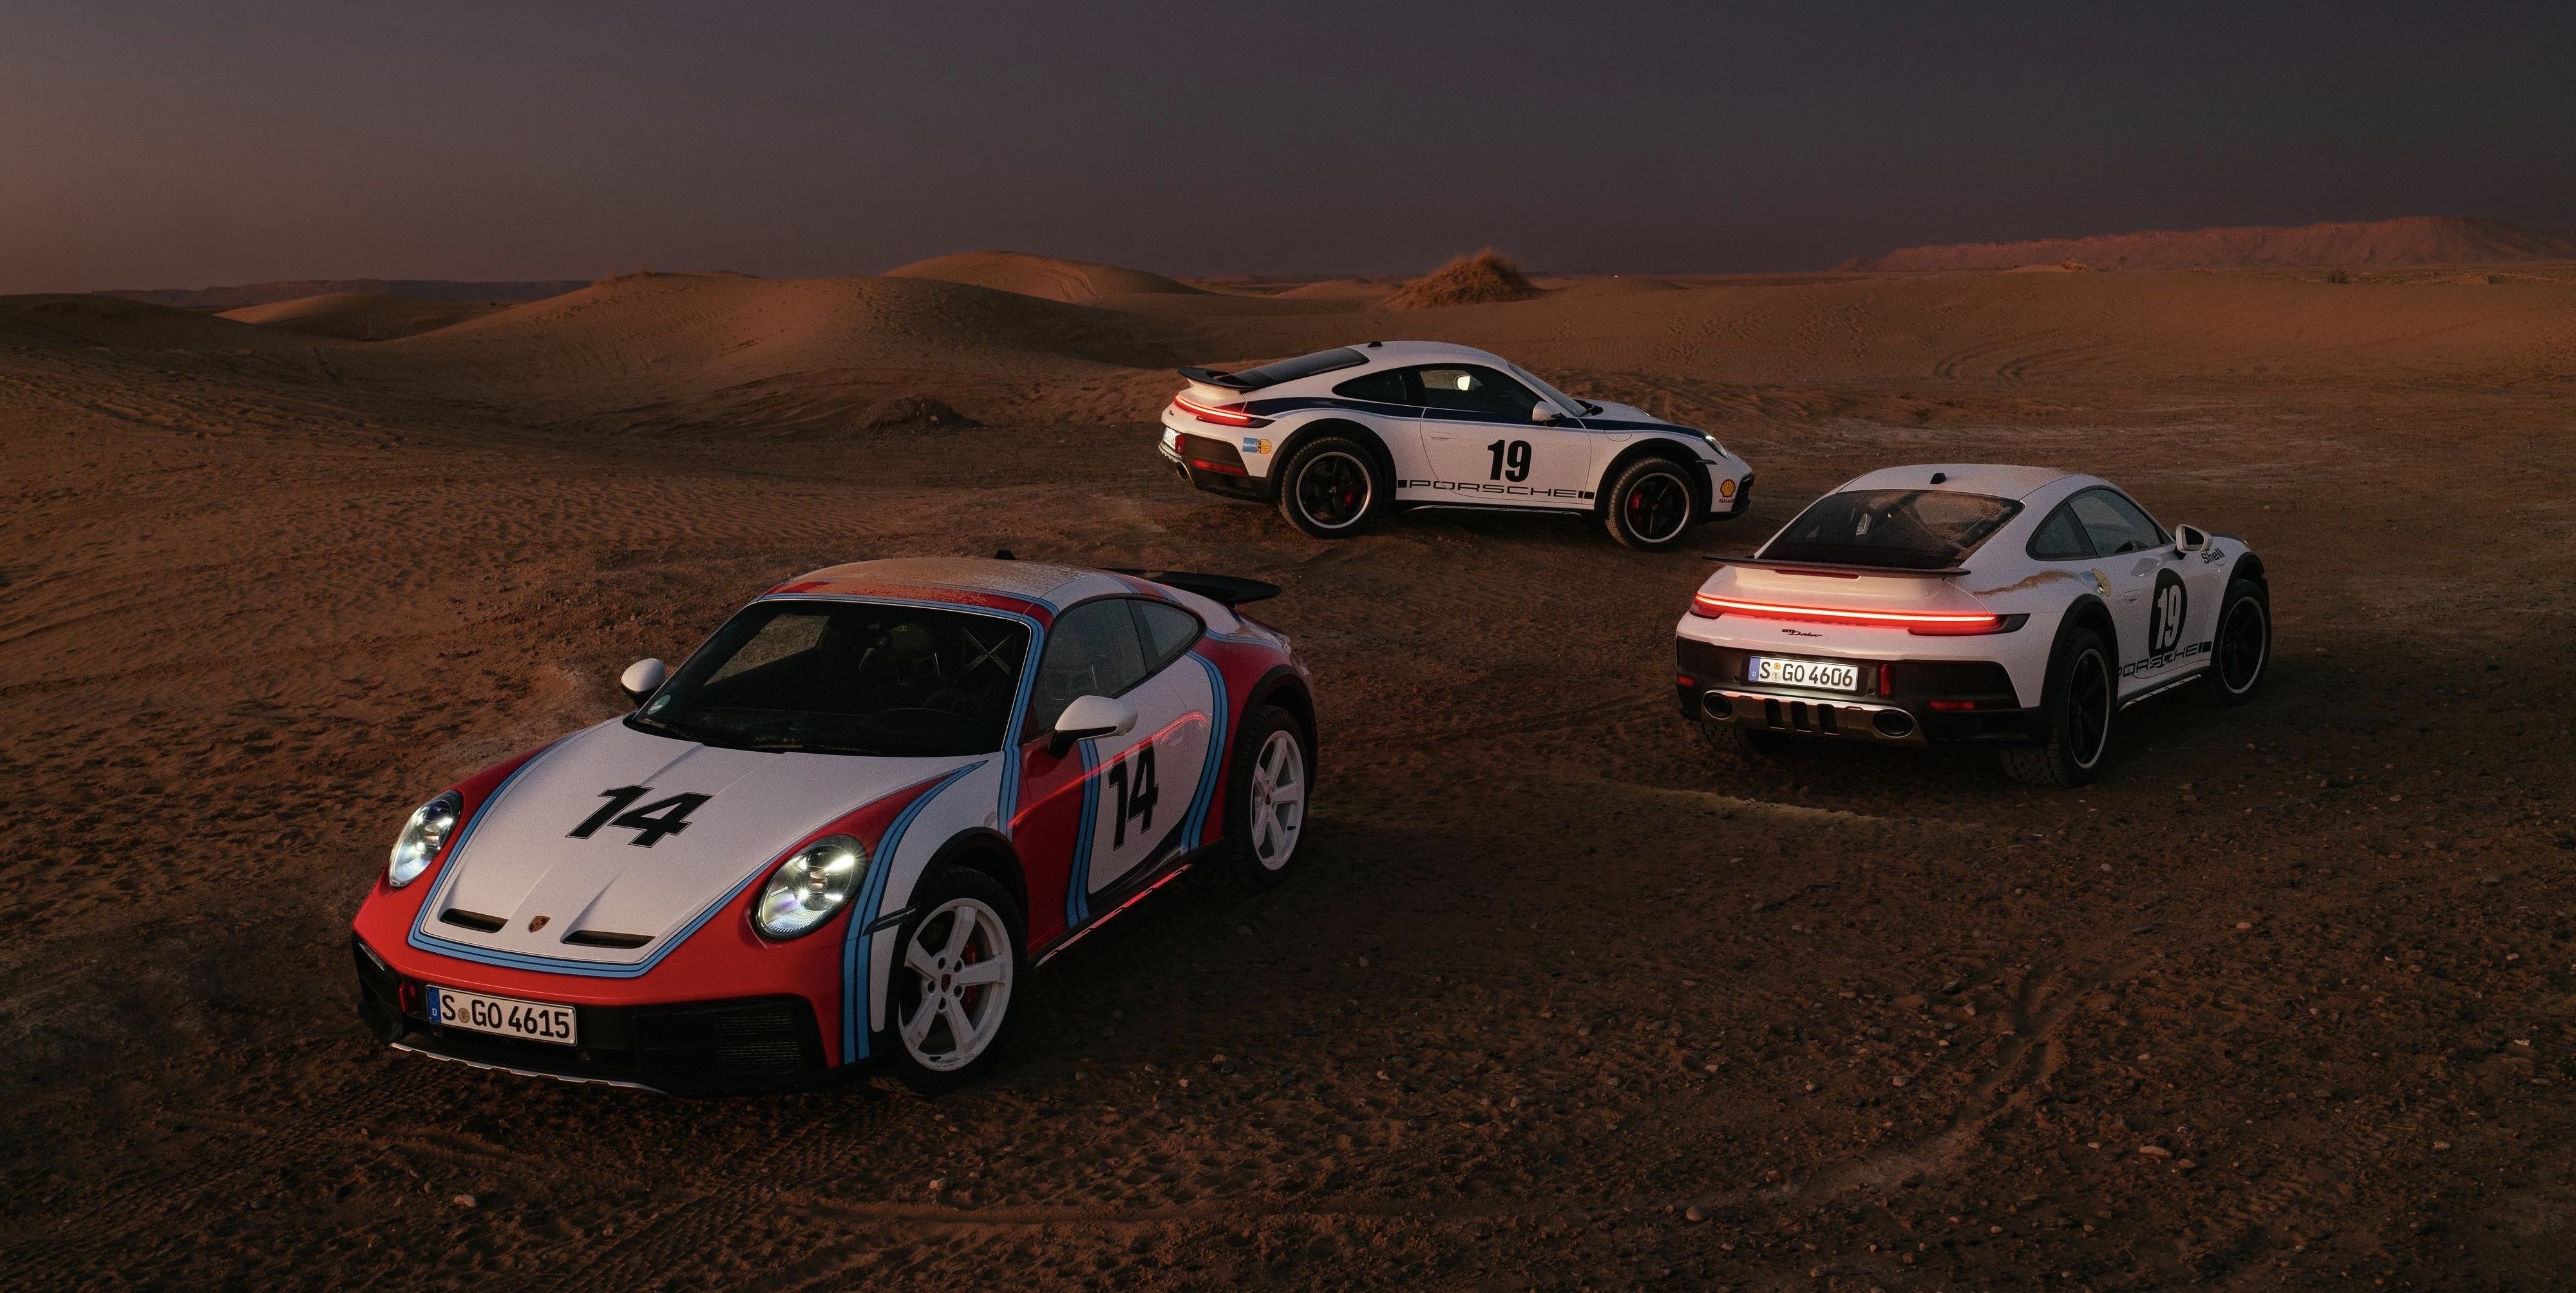 Porsche Will Offer the 911 Dakar in These Sick Rally-Inspired Liveries